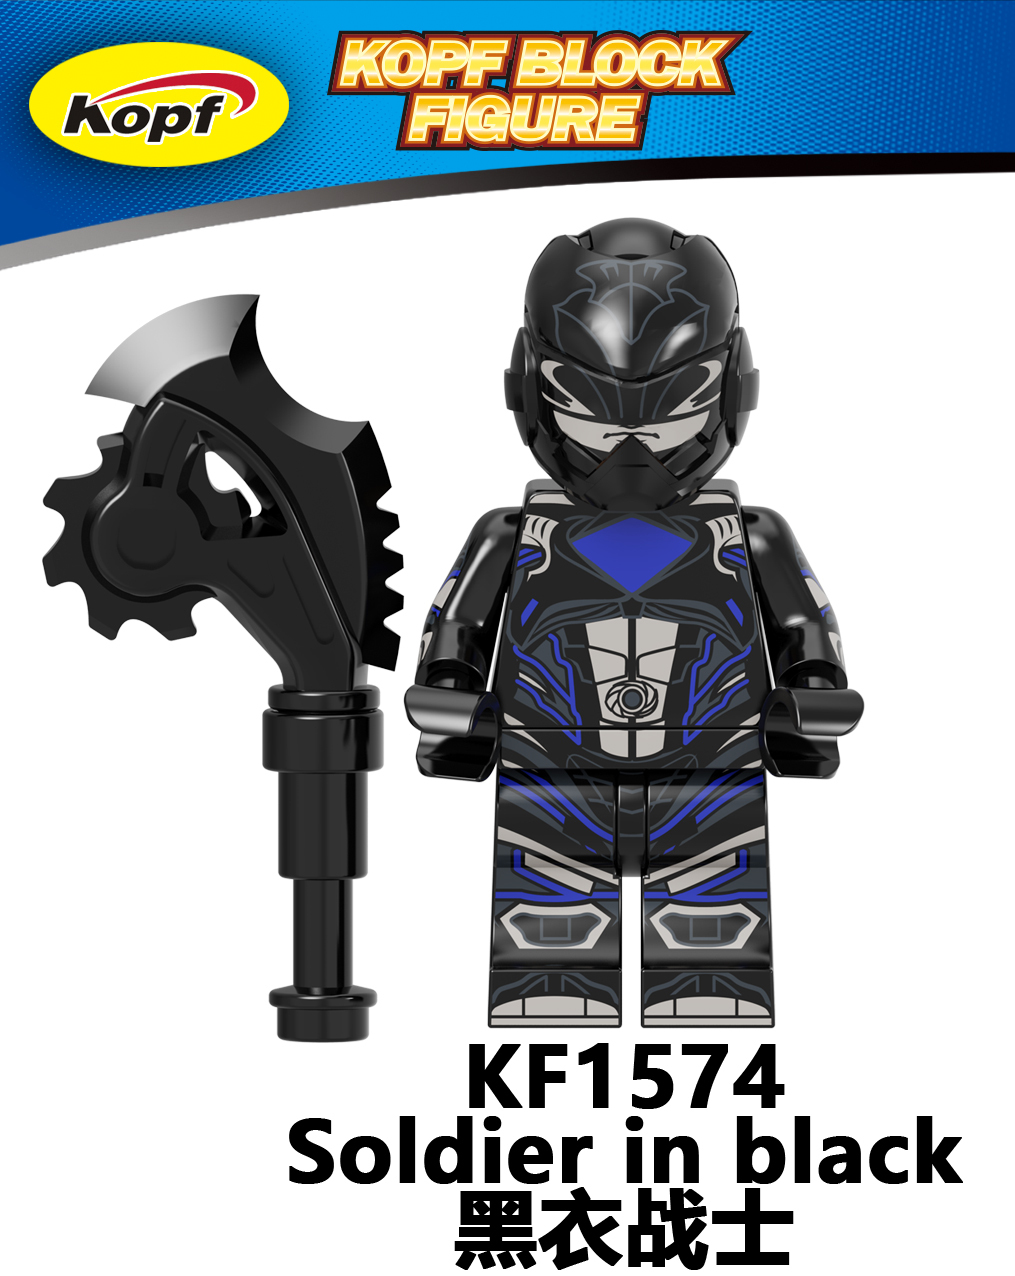 KF1570 KF1571 KF1572 KF1573 KF1574 KF1575 KF1576 KF6144 Power Rangers Bricks Building Blocks Soldiers Warriors Action Figures For Children Toys 